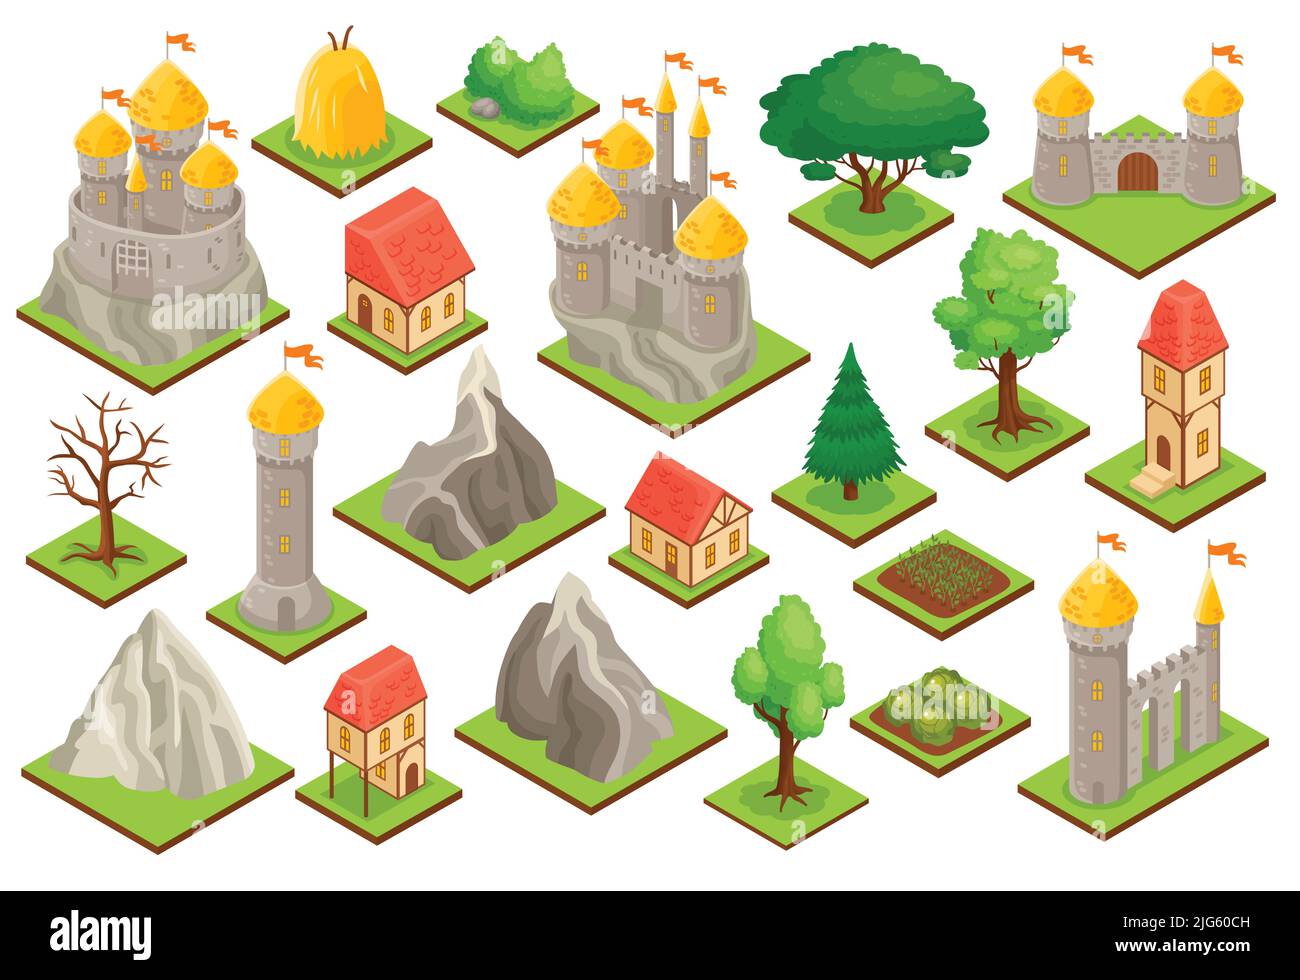 Isometric icons set of medieval castle towers gate city houses trees bushes rocks isolated on white background 3d vector illustration Stock Vector